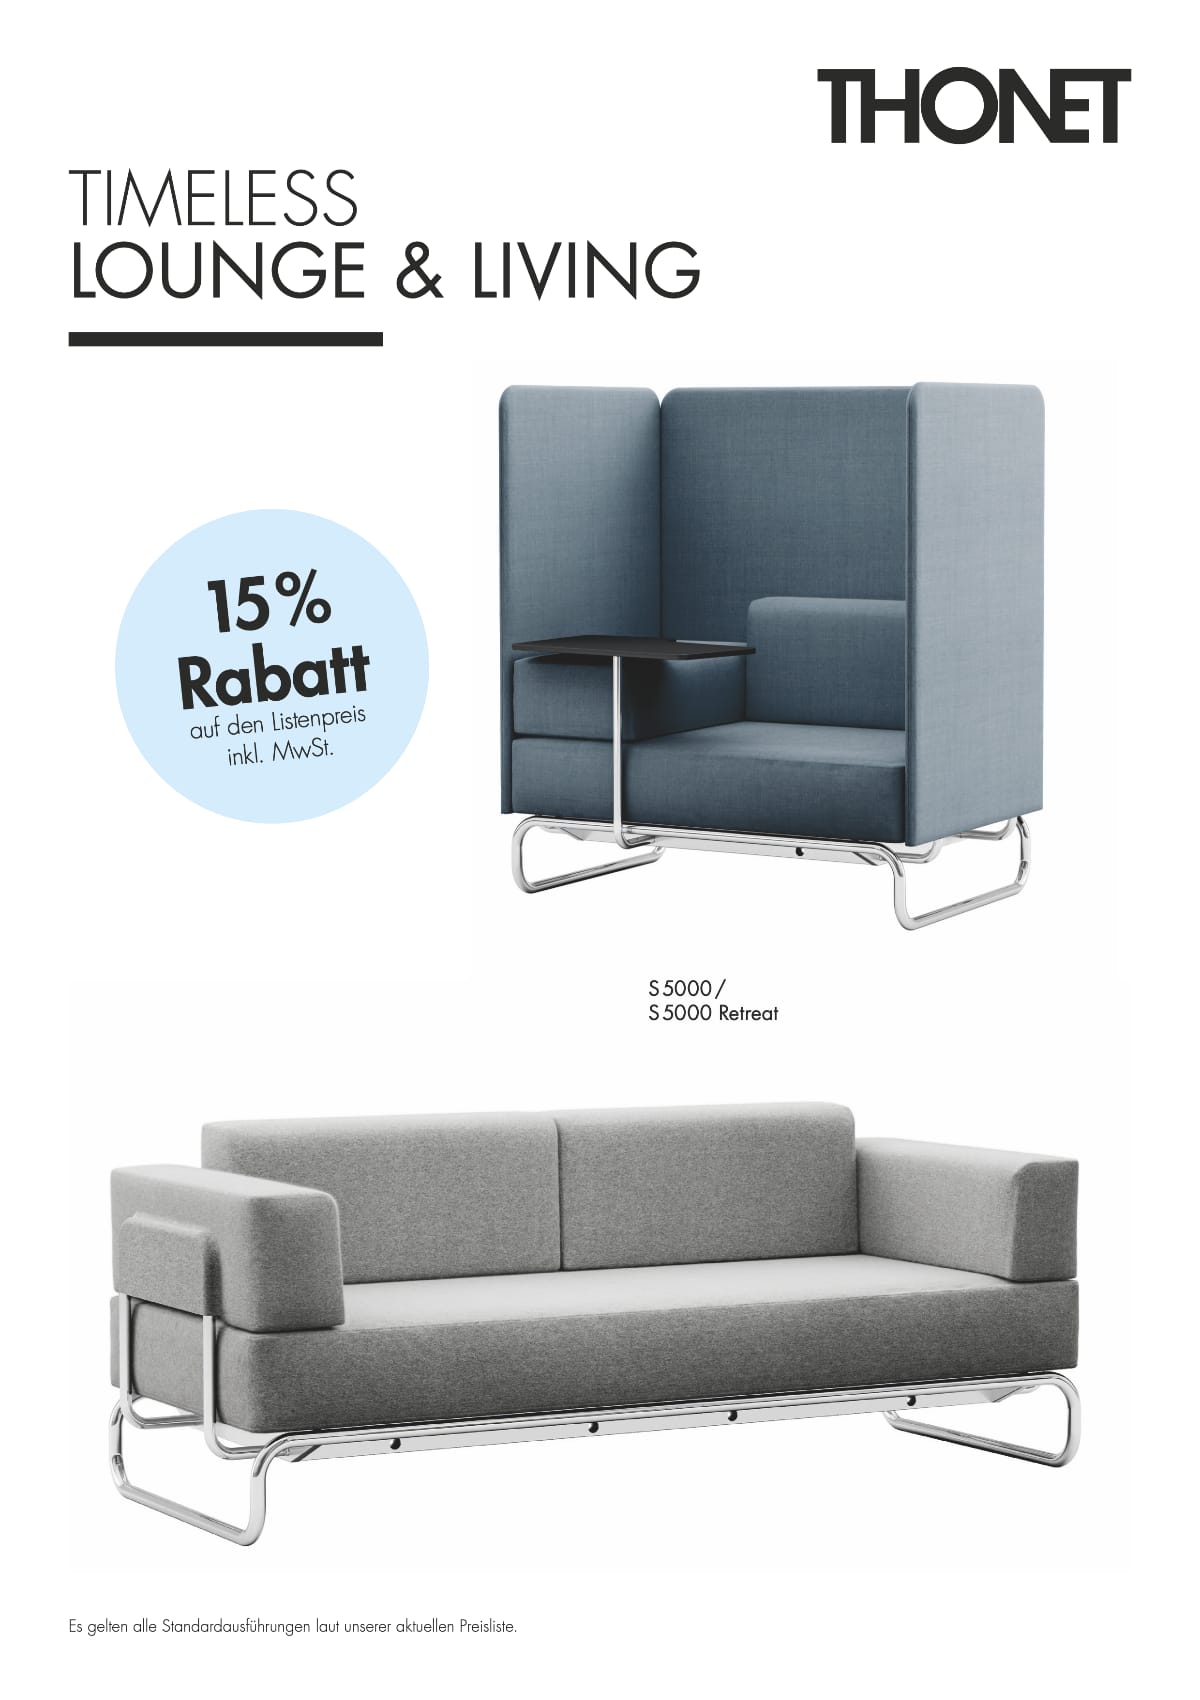 BE. THONET Timeless Lounge & Living